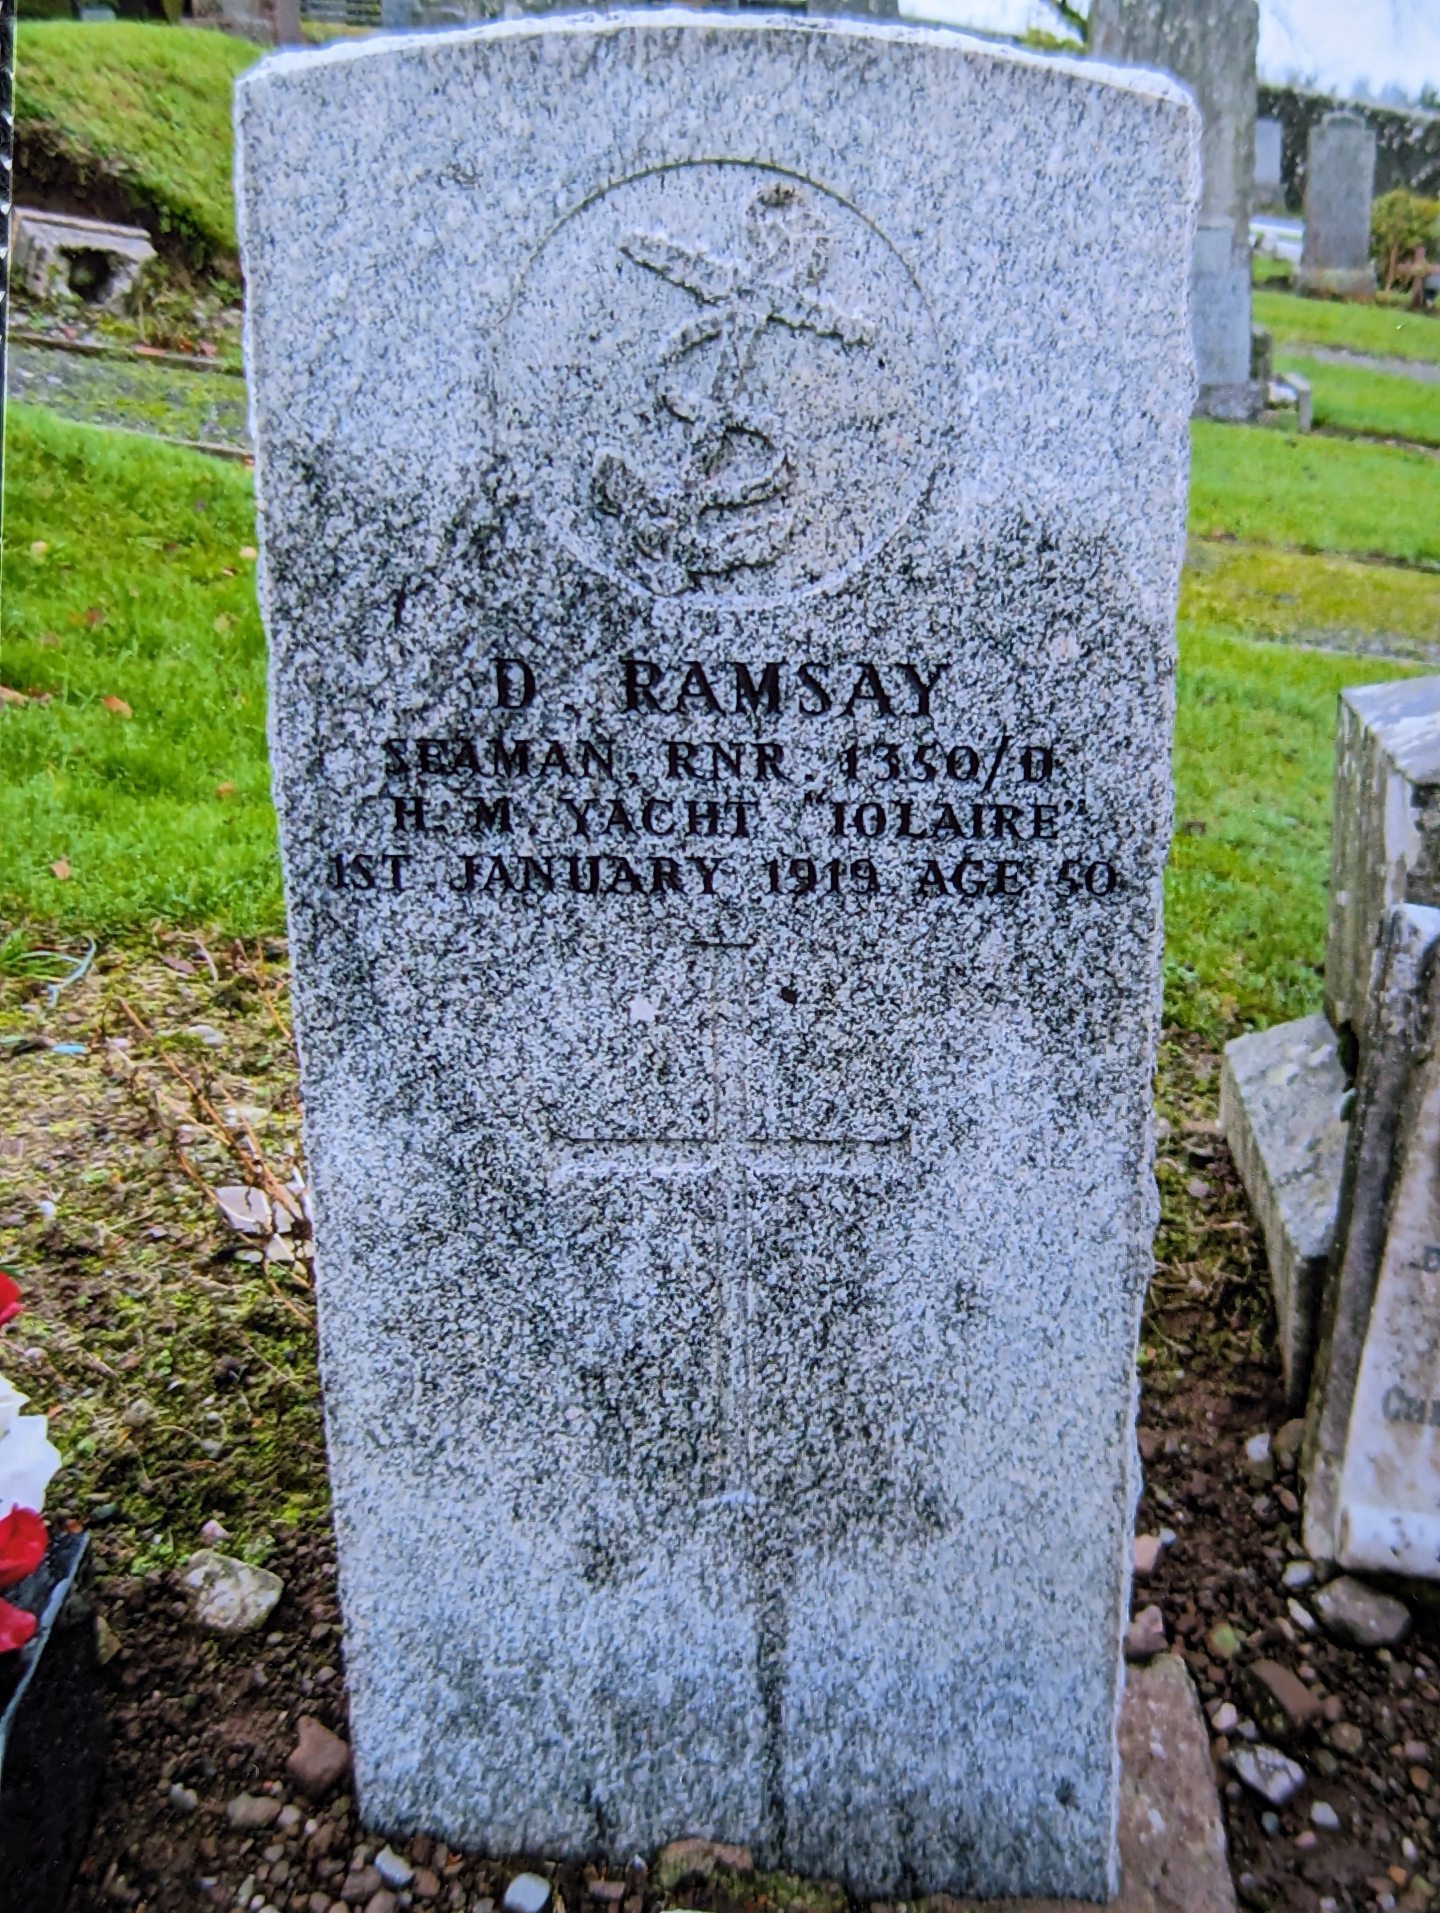 Ramsay's grave in Auchterarder, where he was laid to rest in 1919. Image: Supplied.